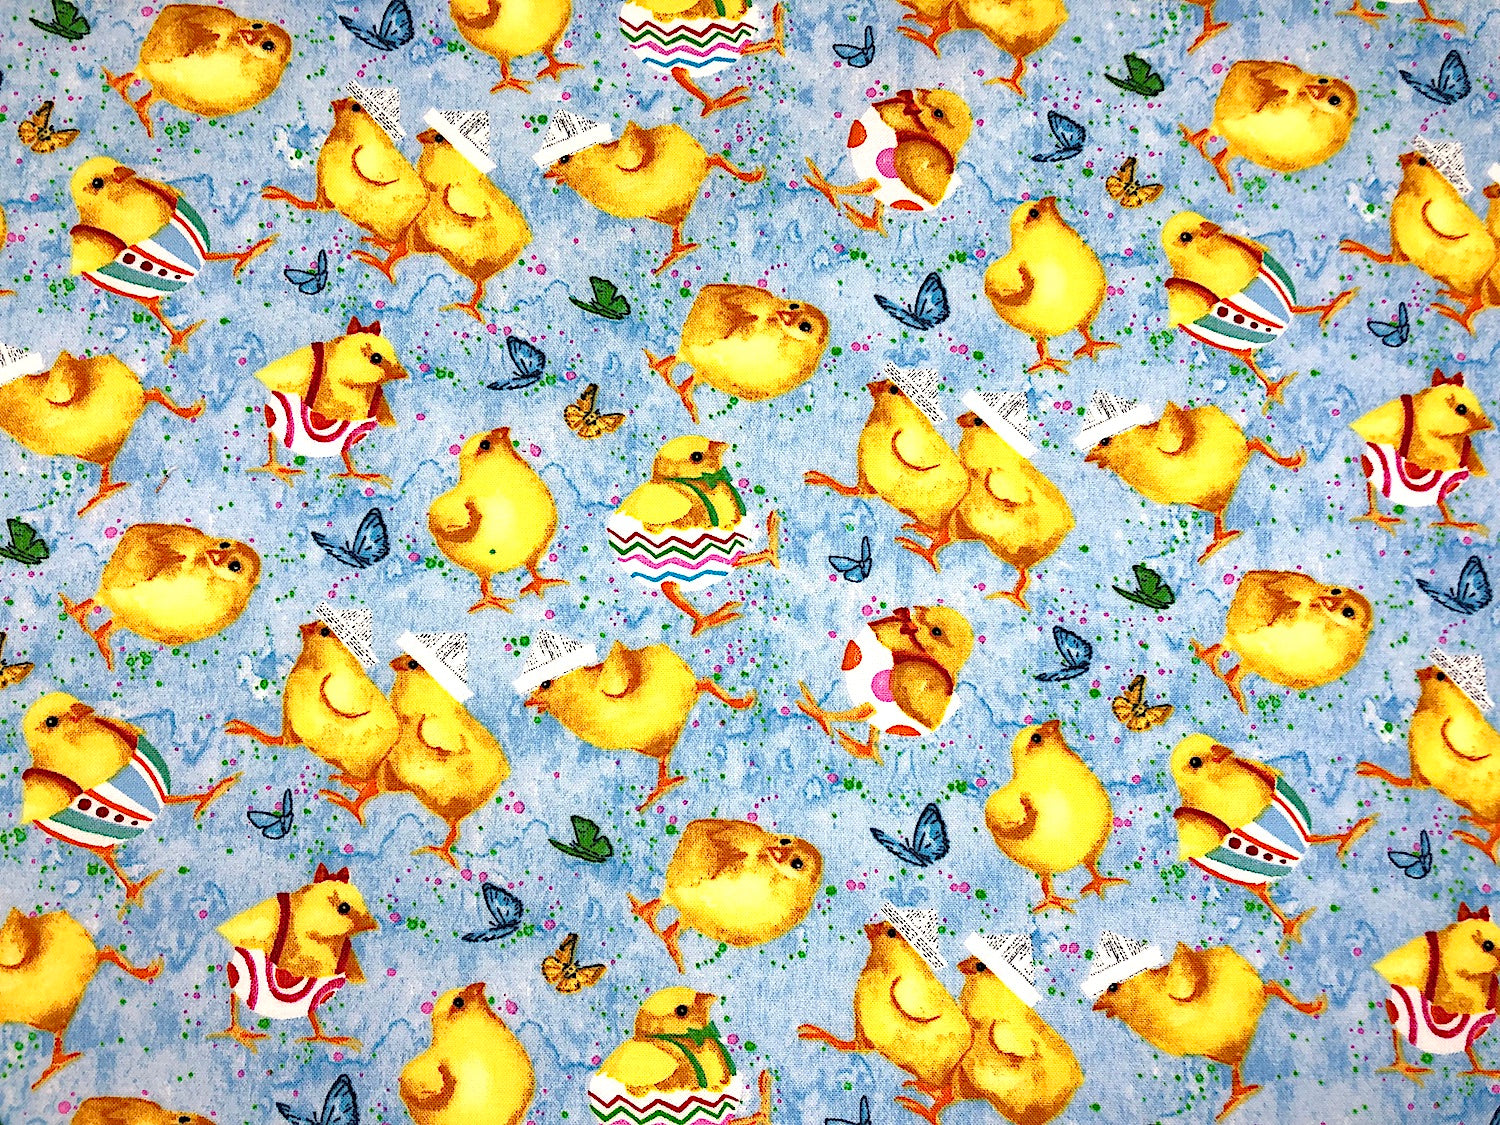 Blue cotton fabric covered with Easter Chicks, some of the chicks are coming out of decorated Easter eggs and others are wearing hats.